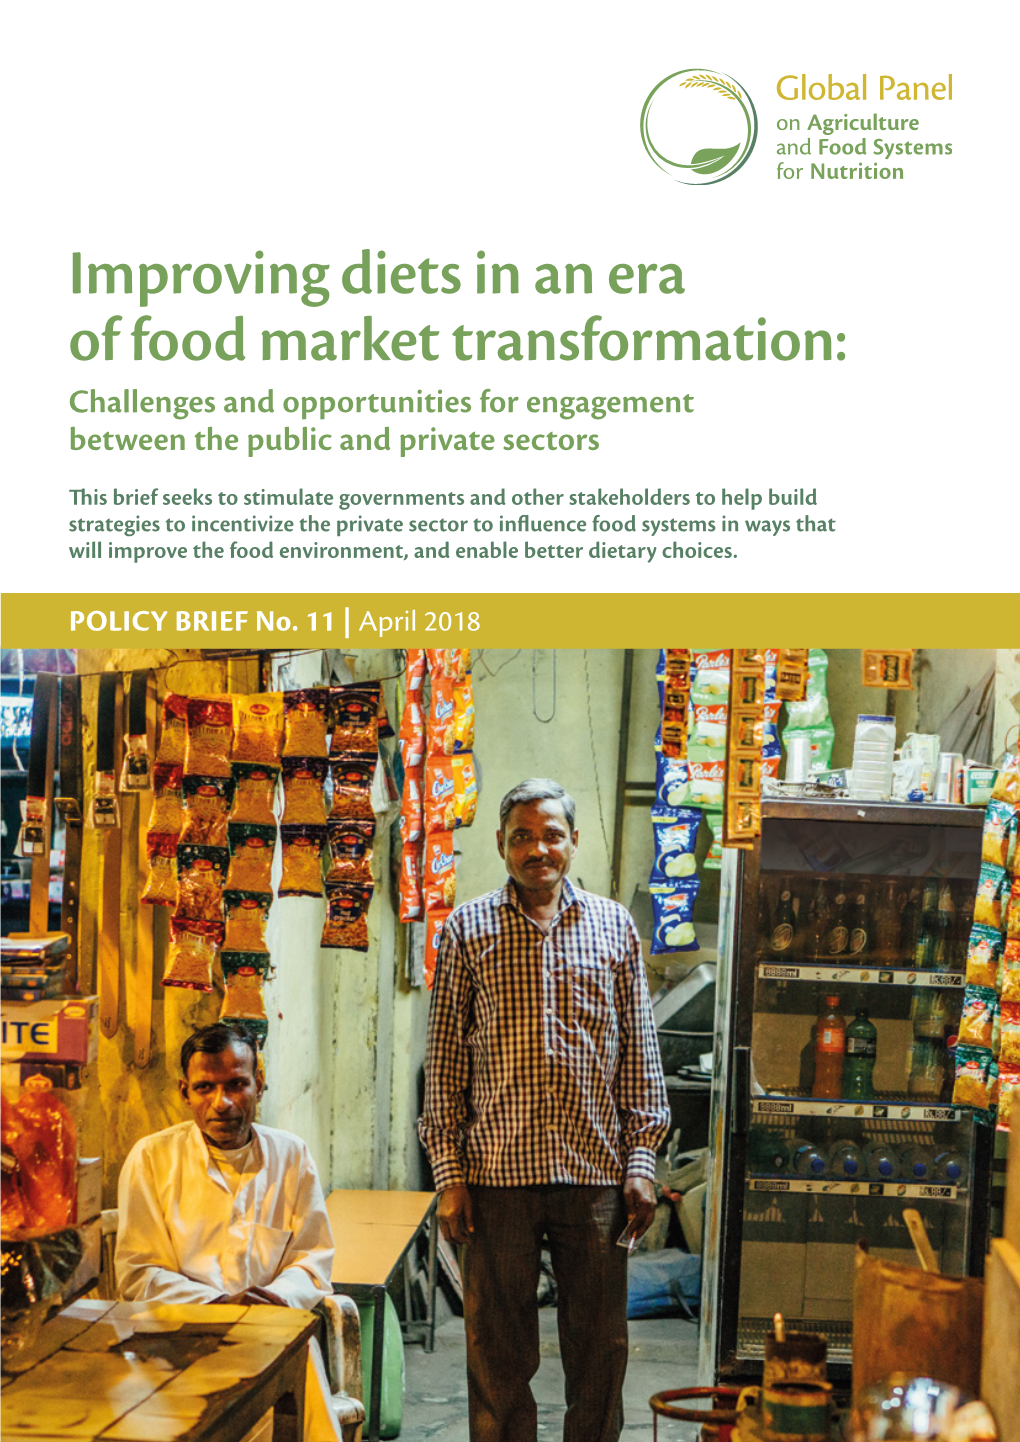 Improving Diets in an Era of Food Market Transformation: Challenges and Opportunities for Engagement Between the Public and Private Sectors